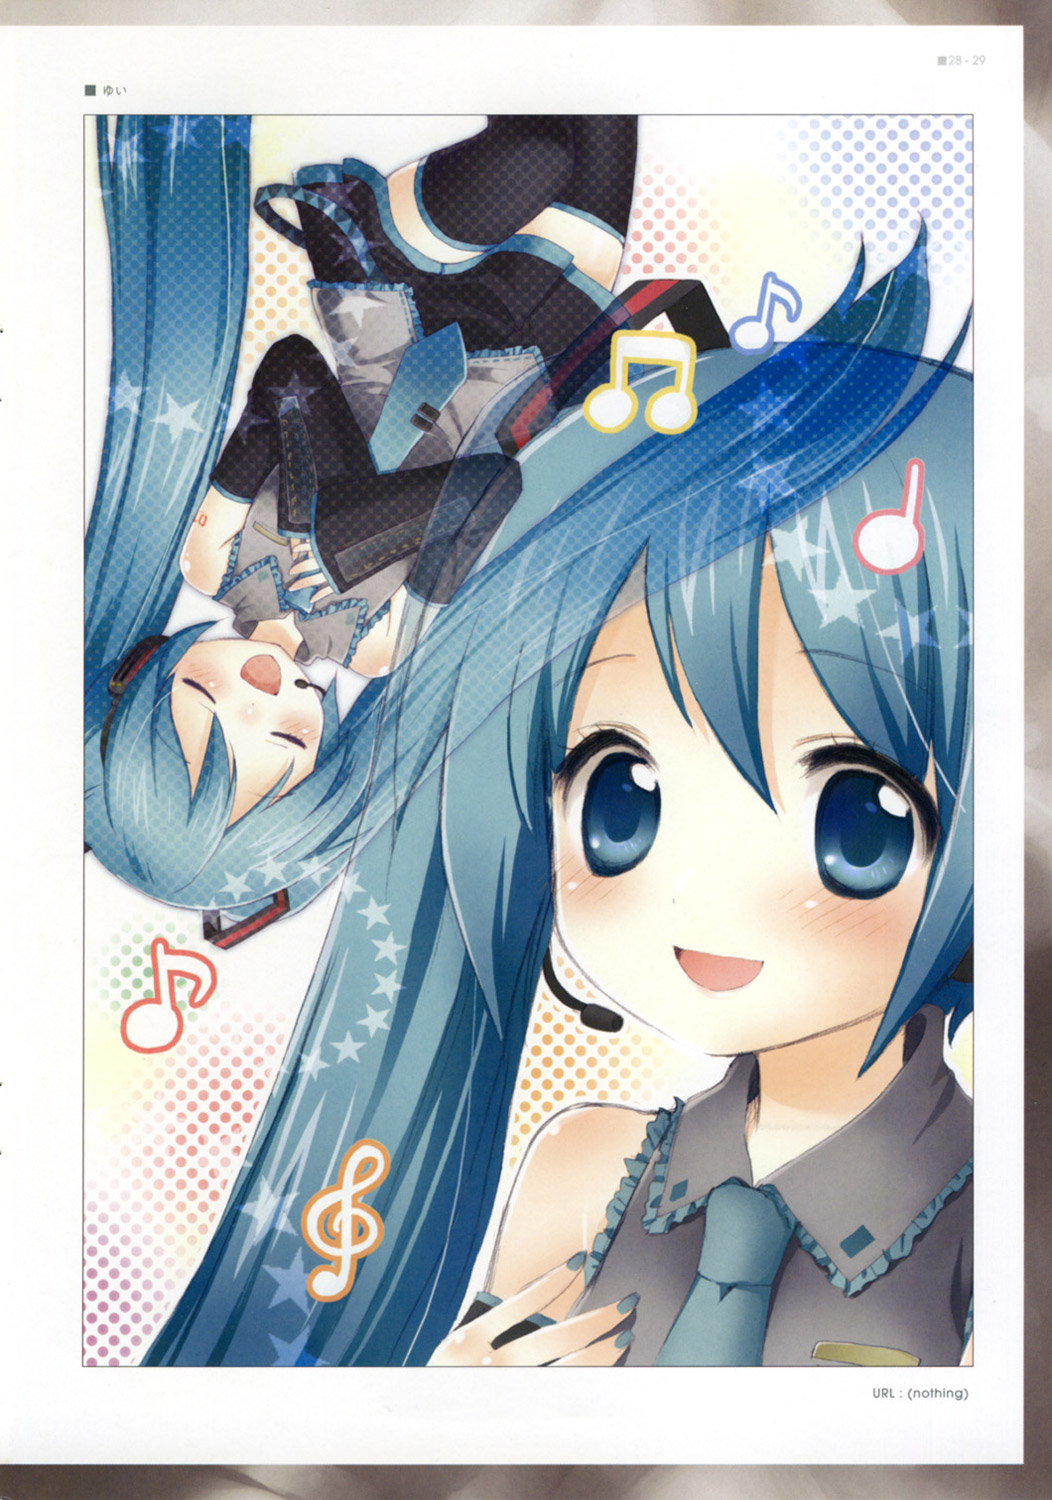 Vocaloid's unofficial illustrations image by Various Artists